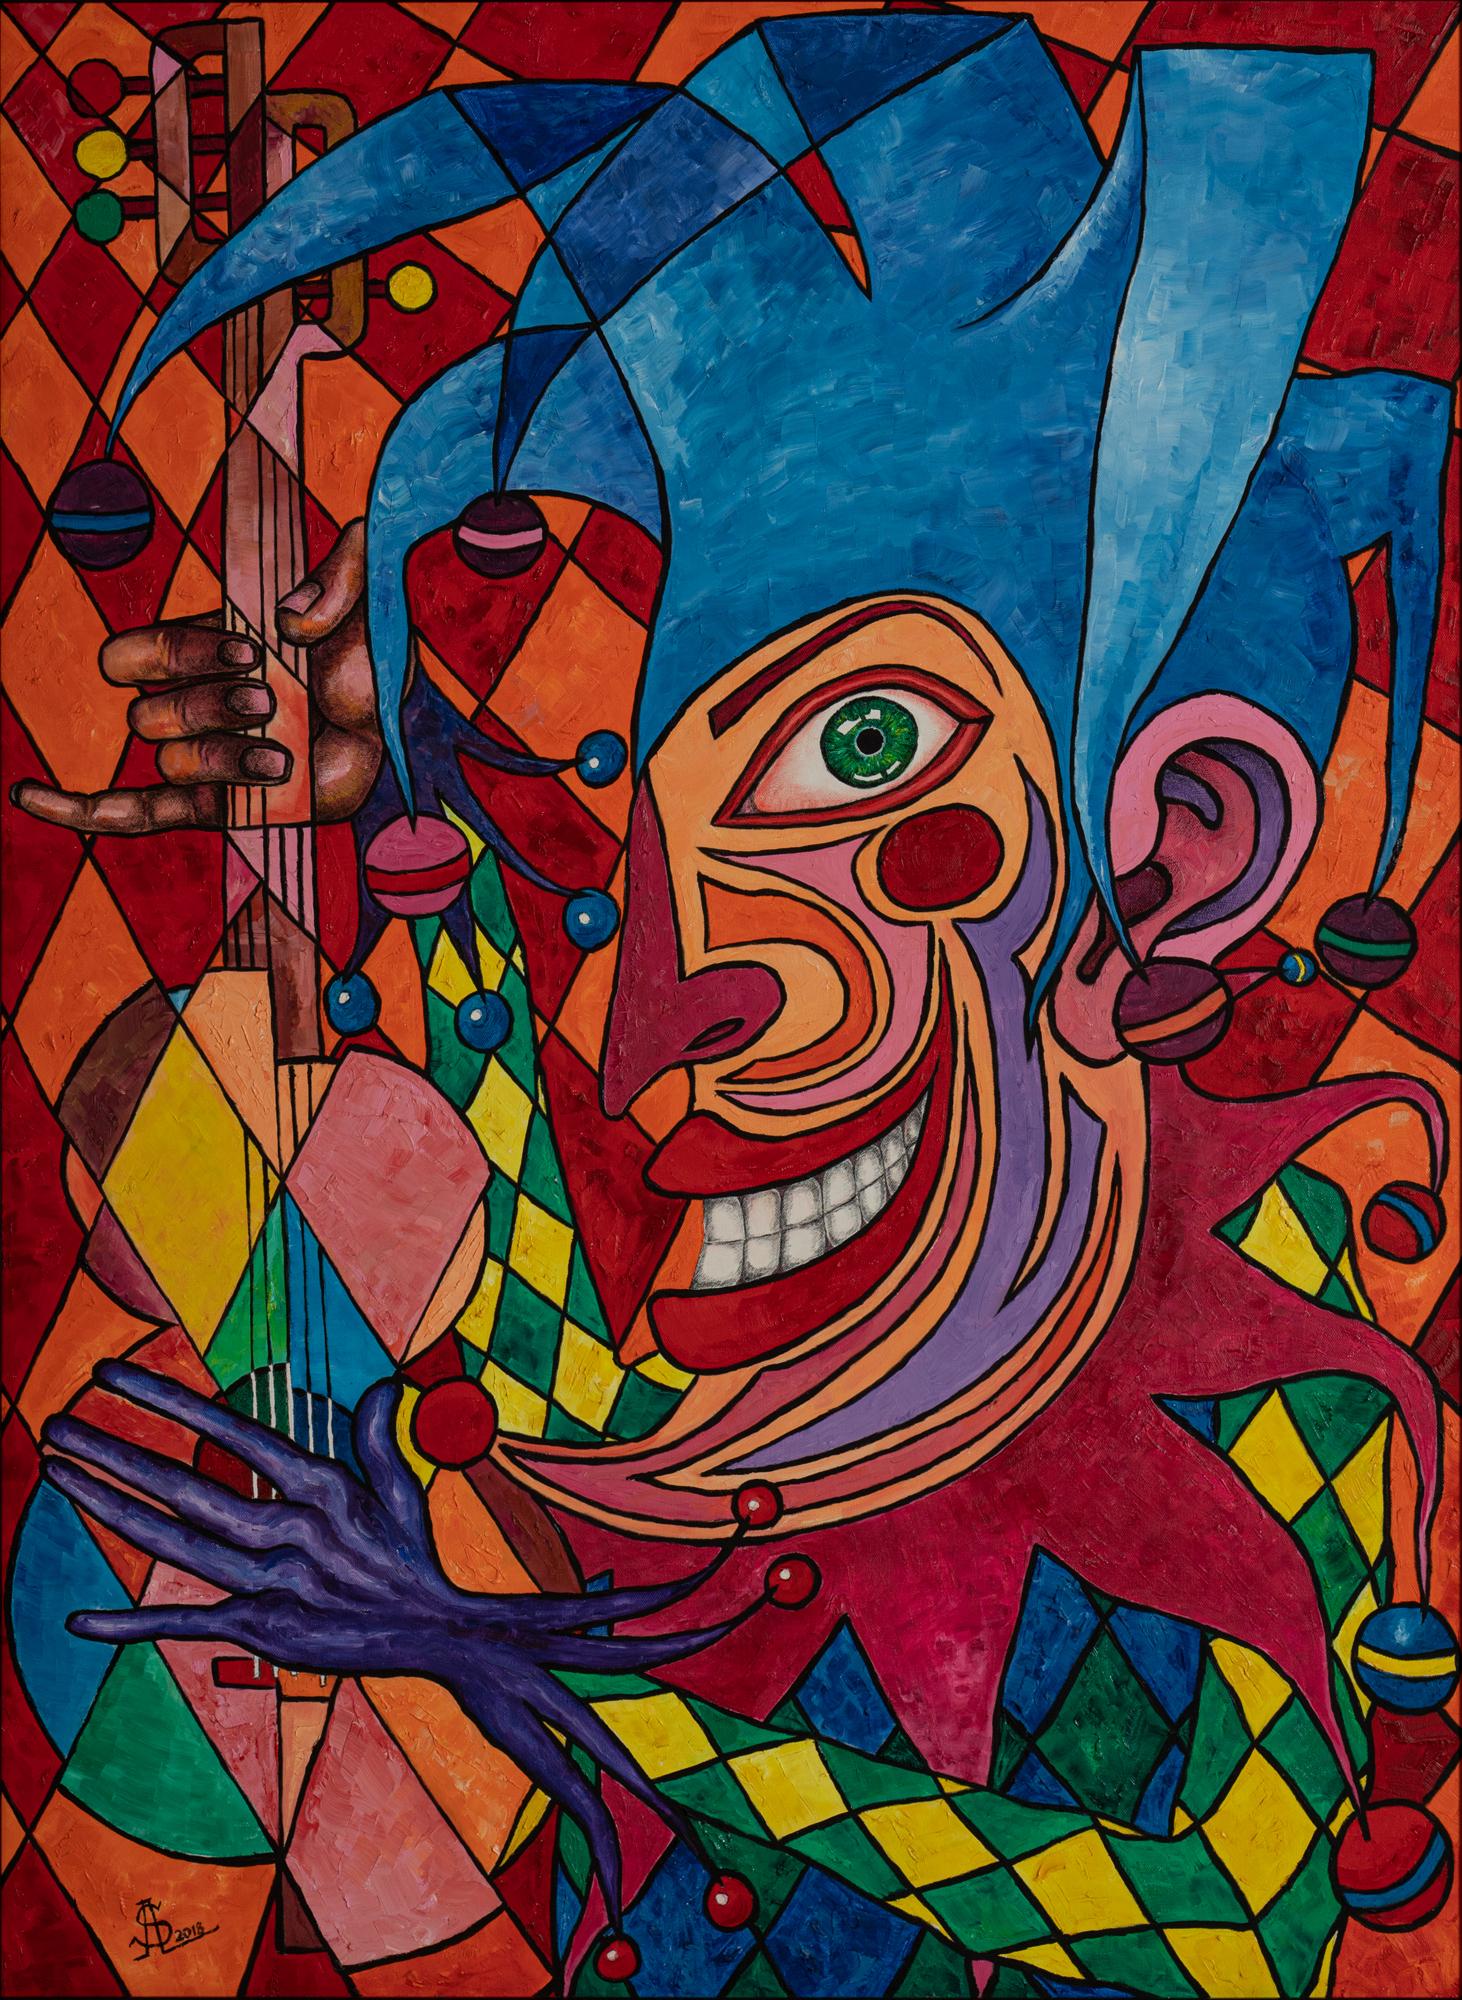 Jester In Blue  - Original Oil Painting 48" x 36"